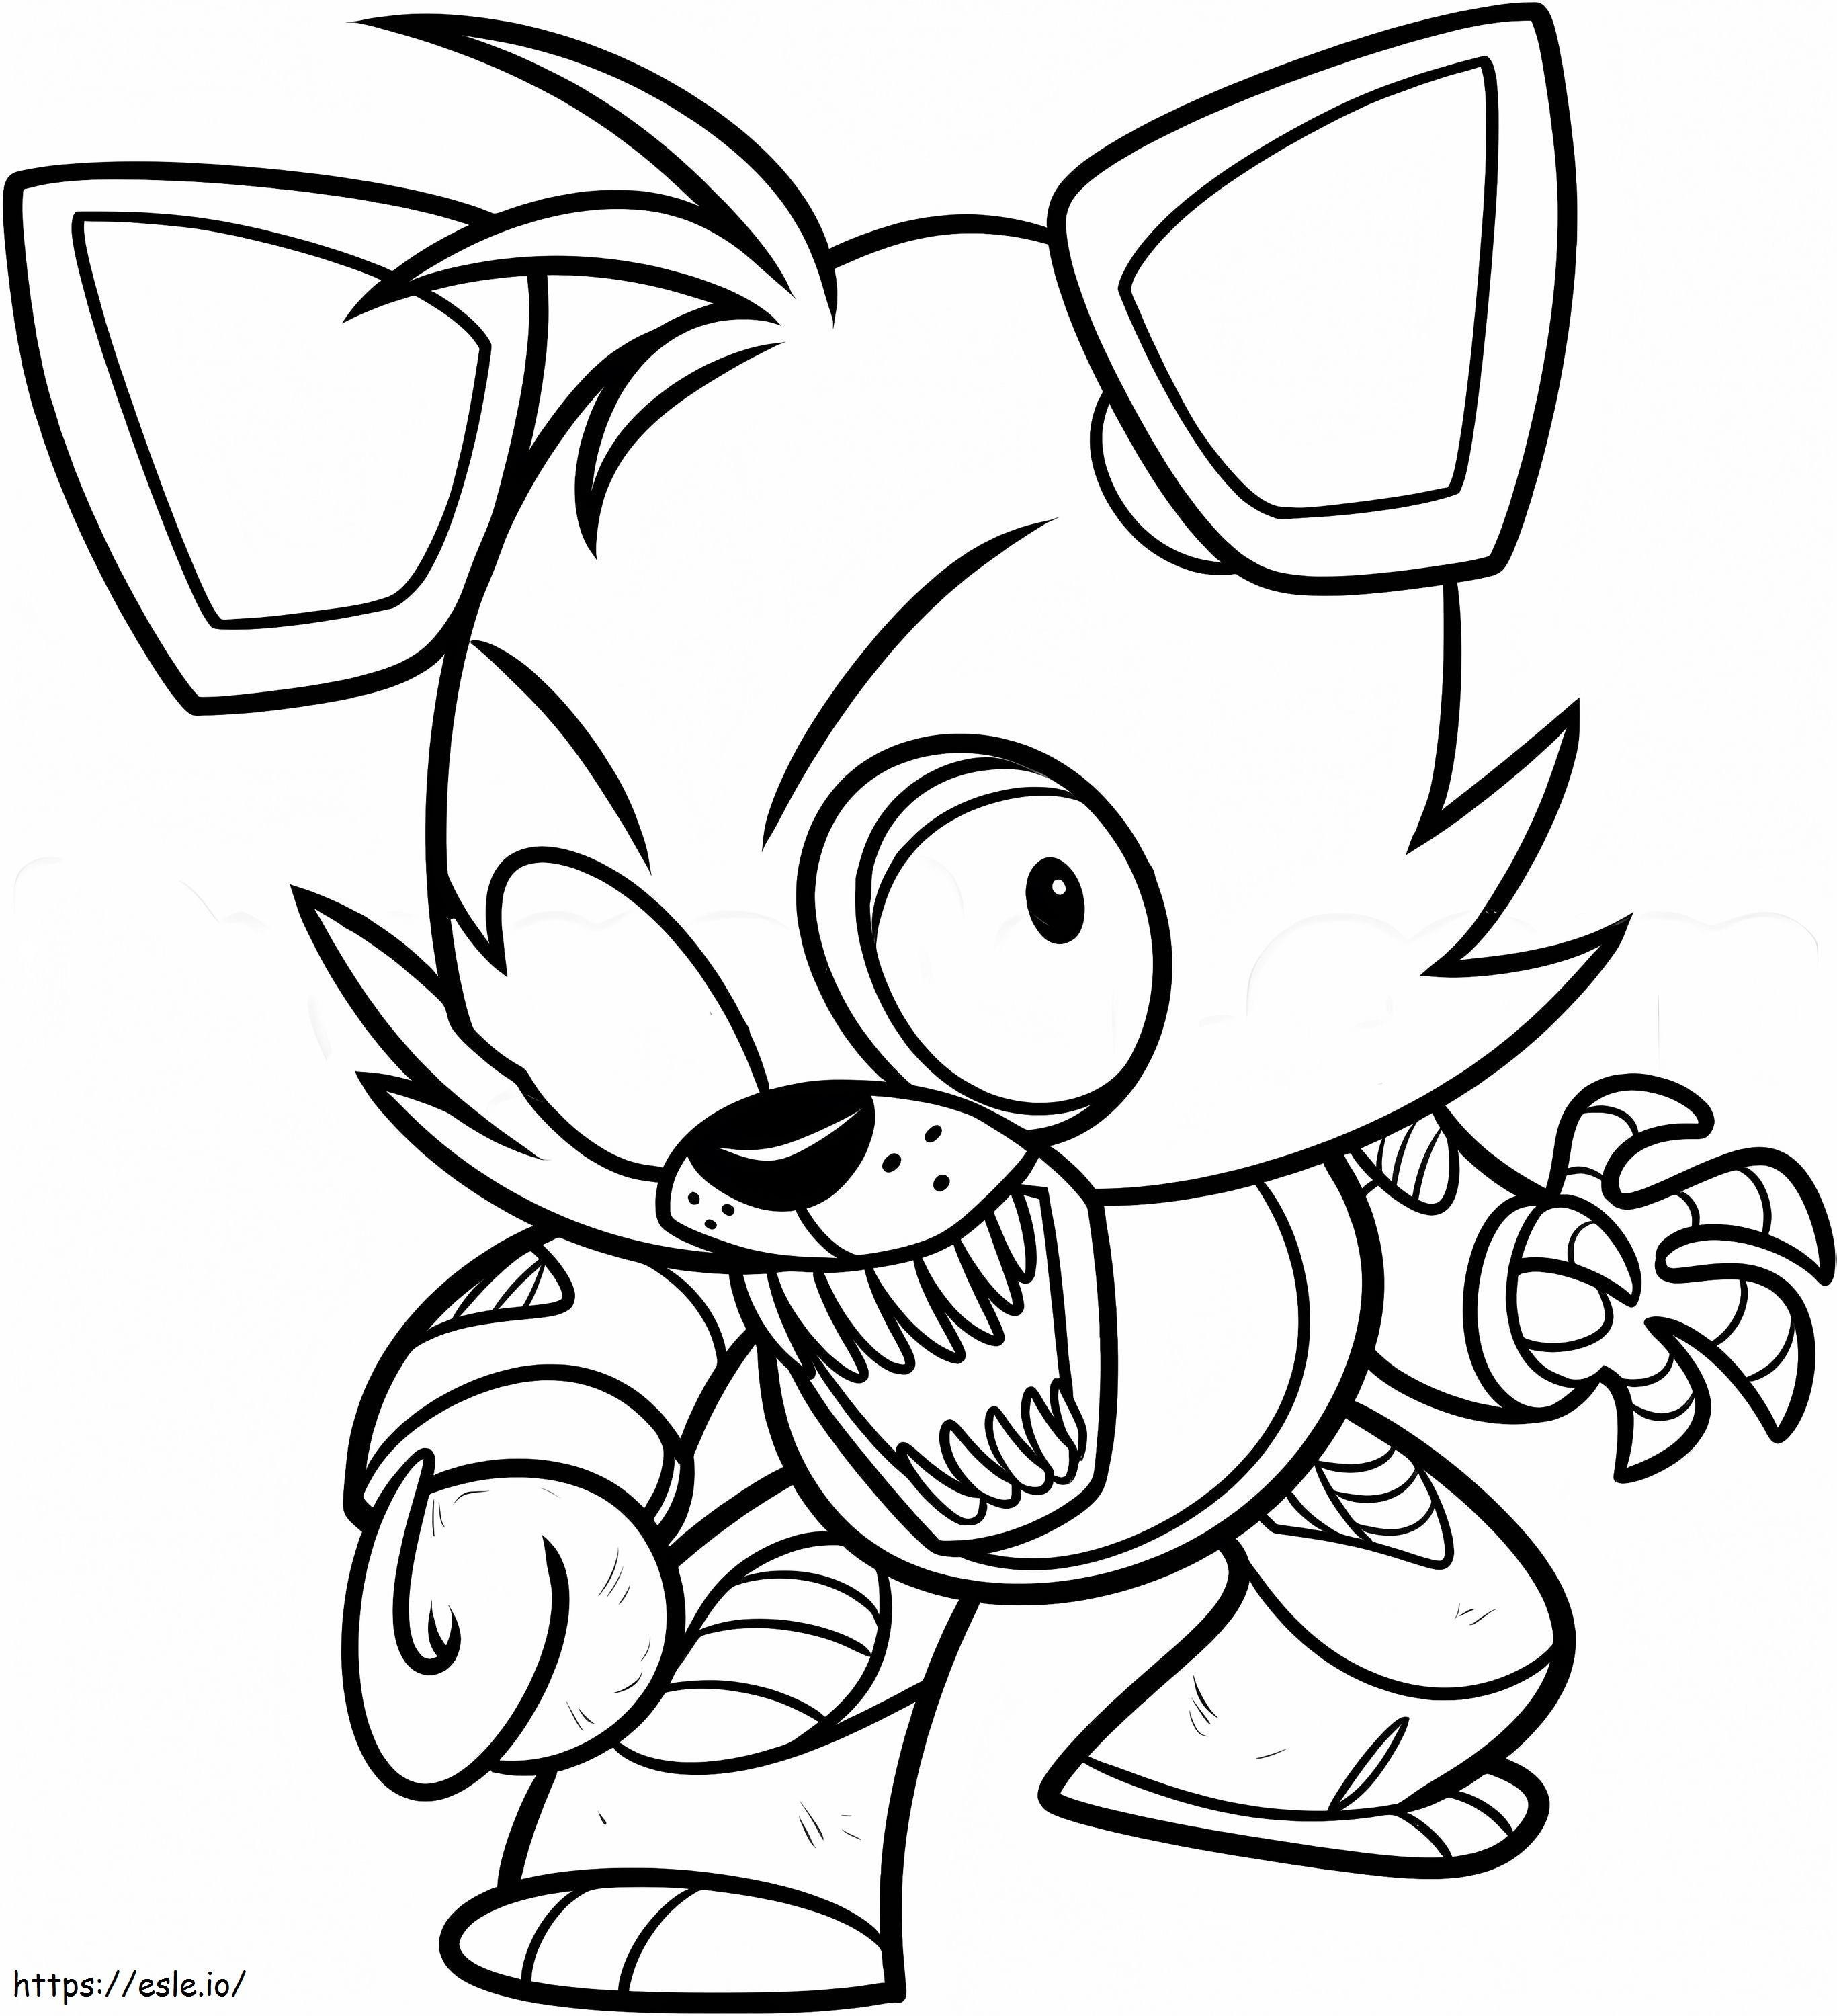 Cute Sneaky Creepy 1 coloring page